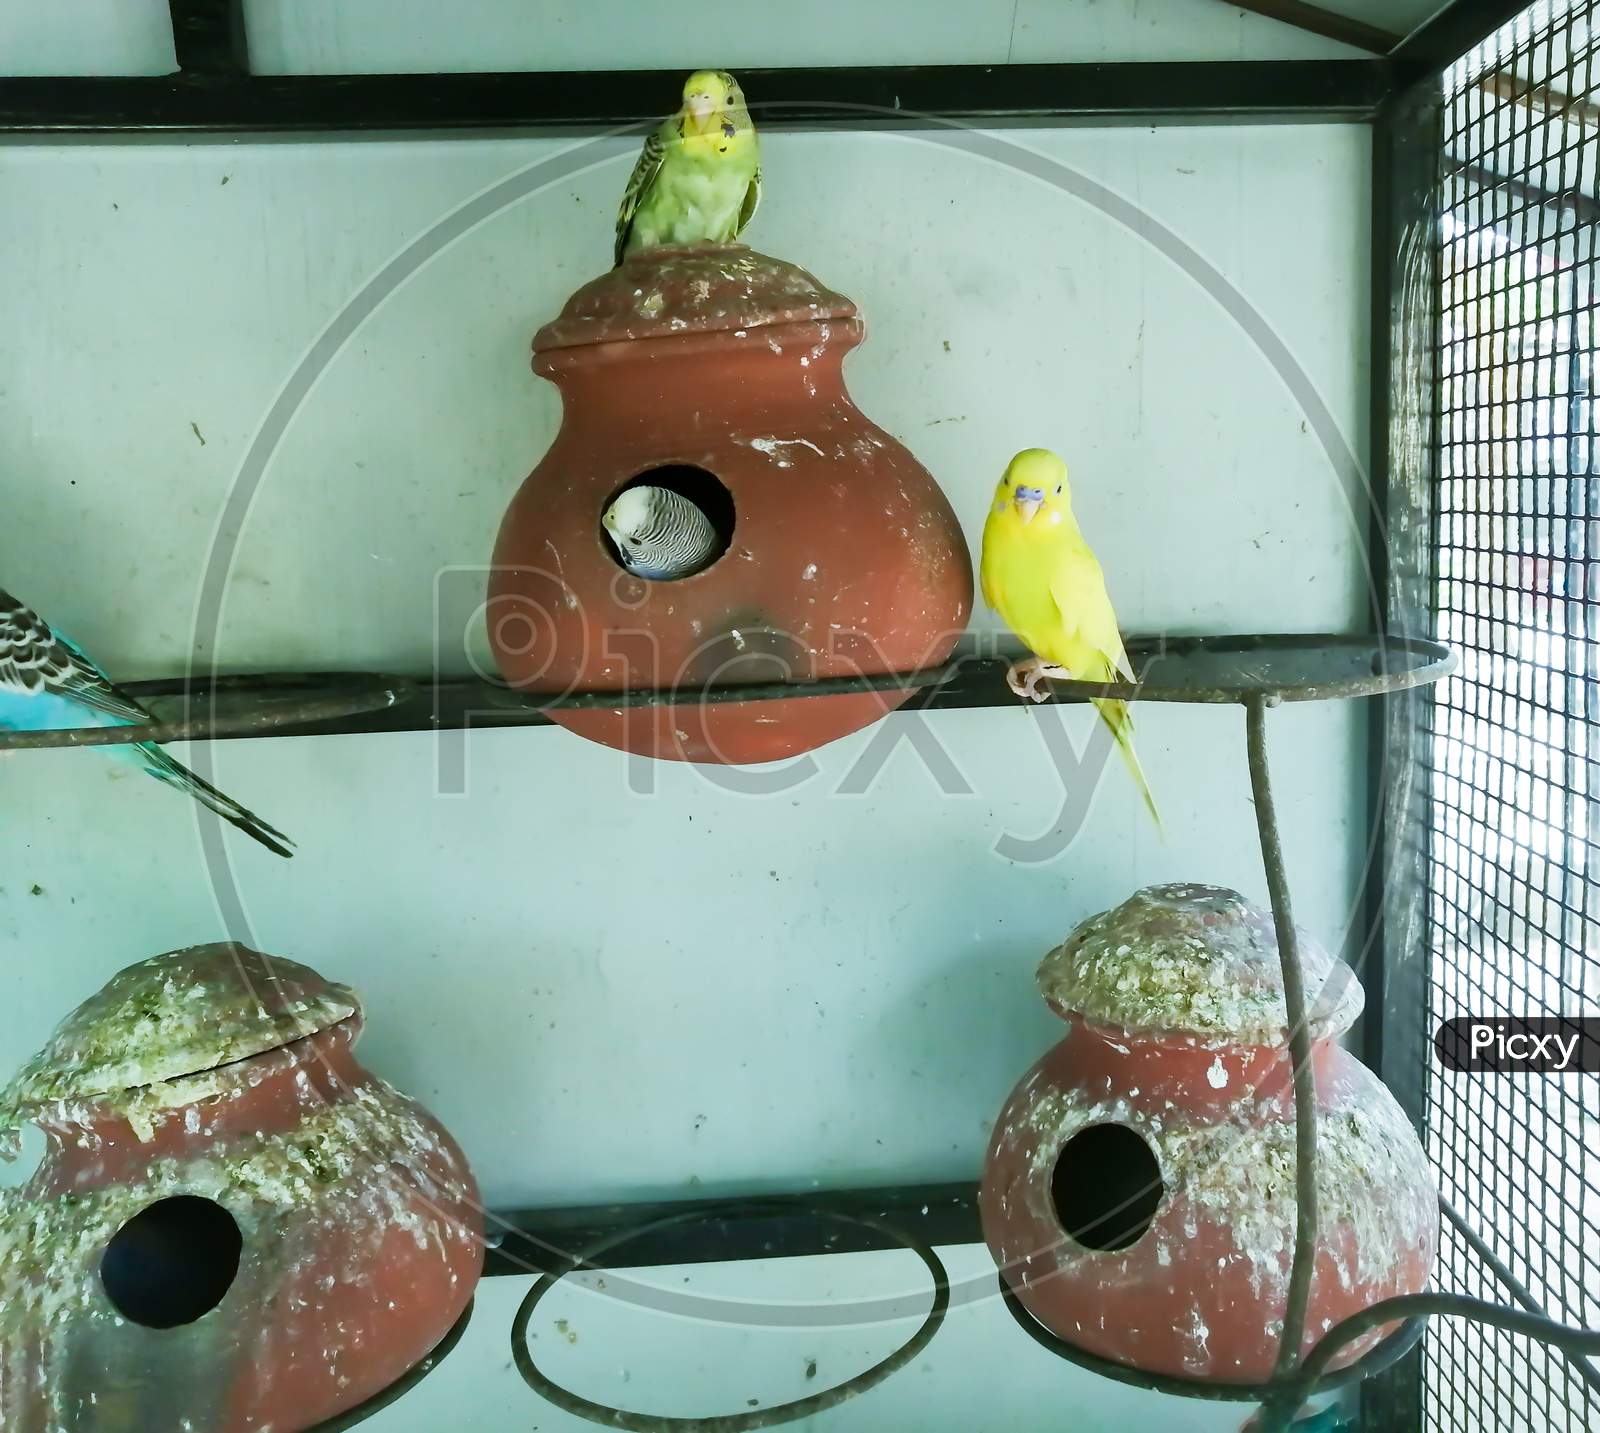 There Are Couple Of Lovebirds In Its Cage.